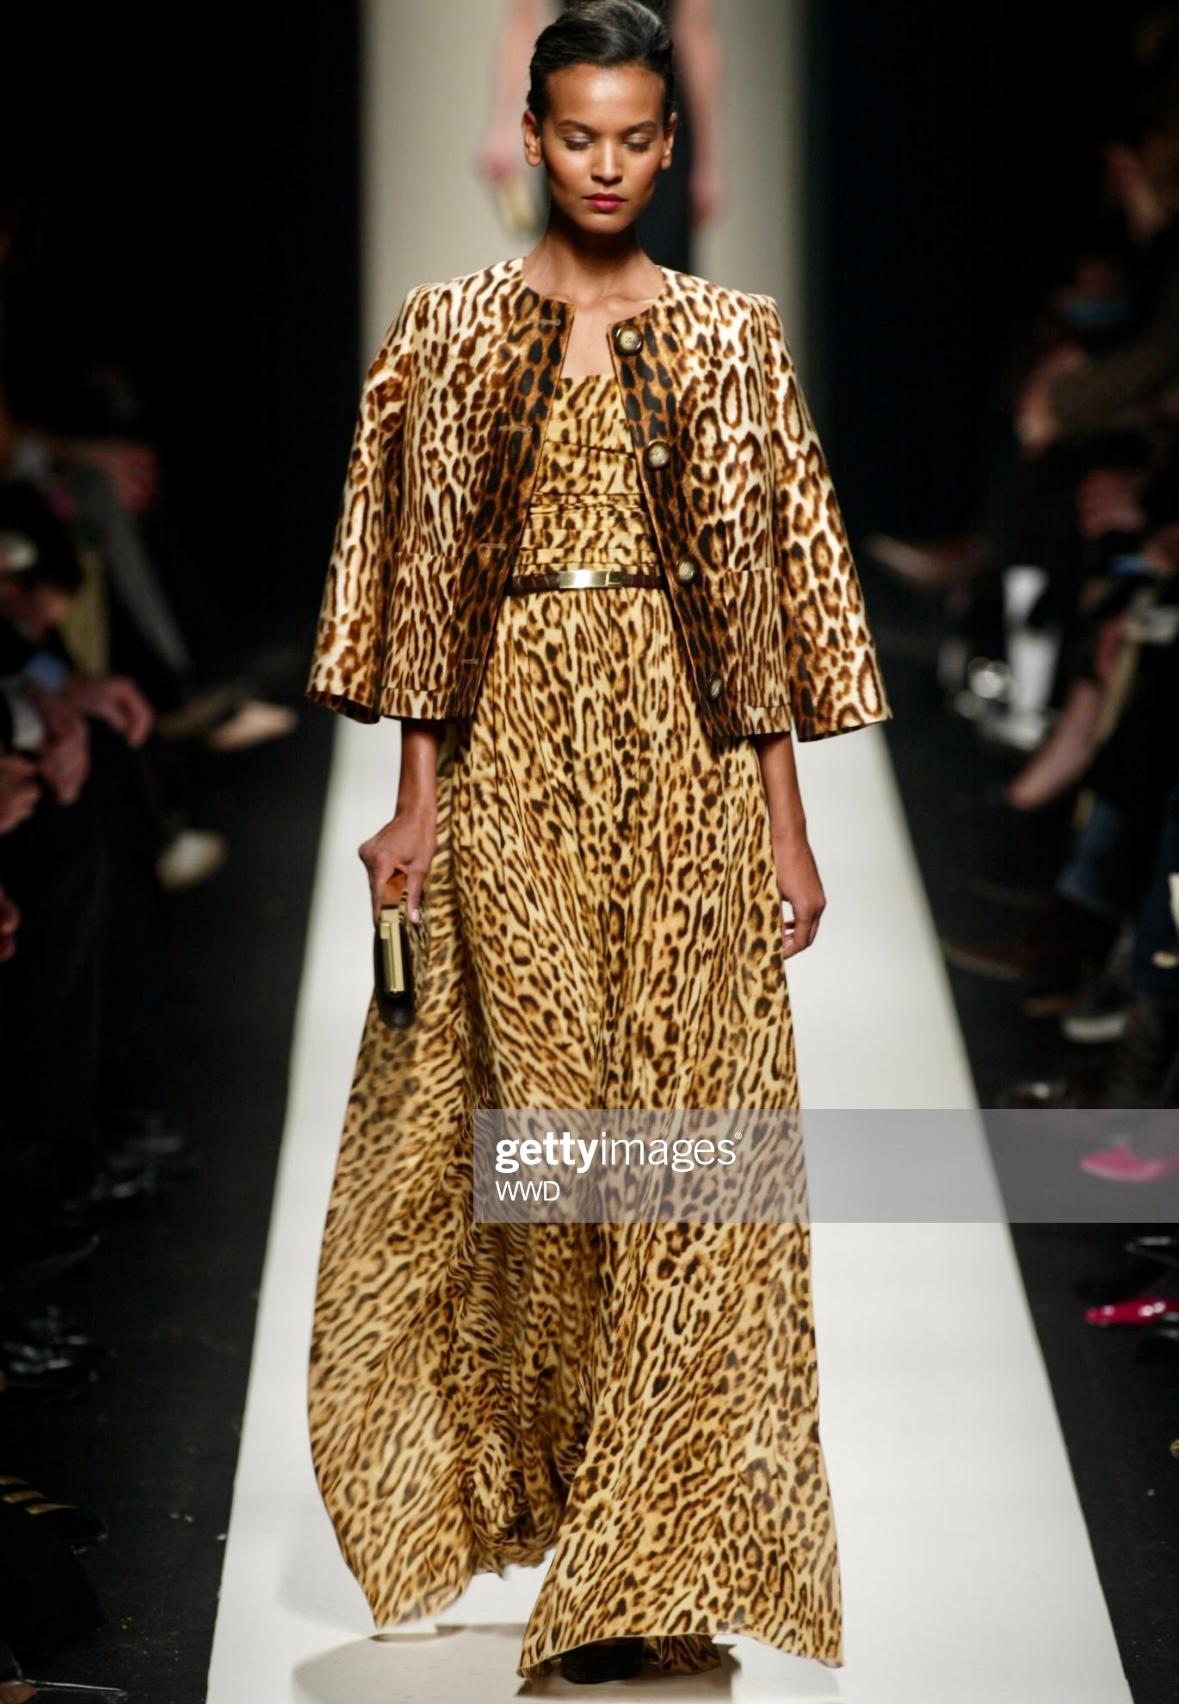 Presenting a beautiful cheetah print Celine gown, designed by Michael Kors. From the Fall/Winter 2004 collection, this strapless dress debuted on the season's runway and features a ruched bust and internal corset. The full-length dress is made